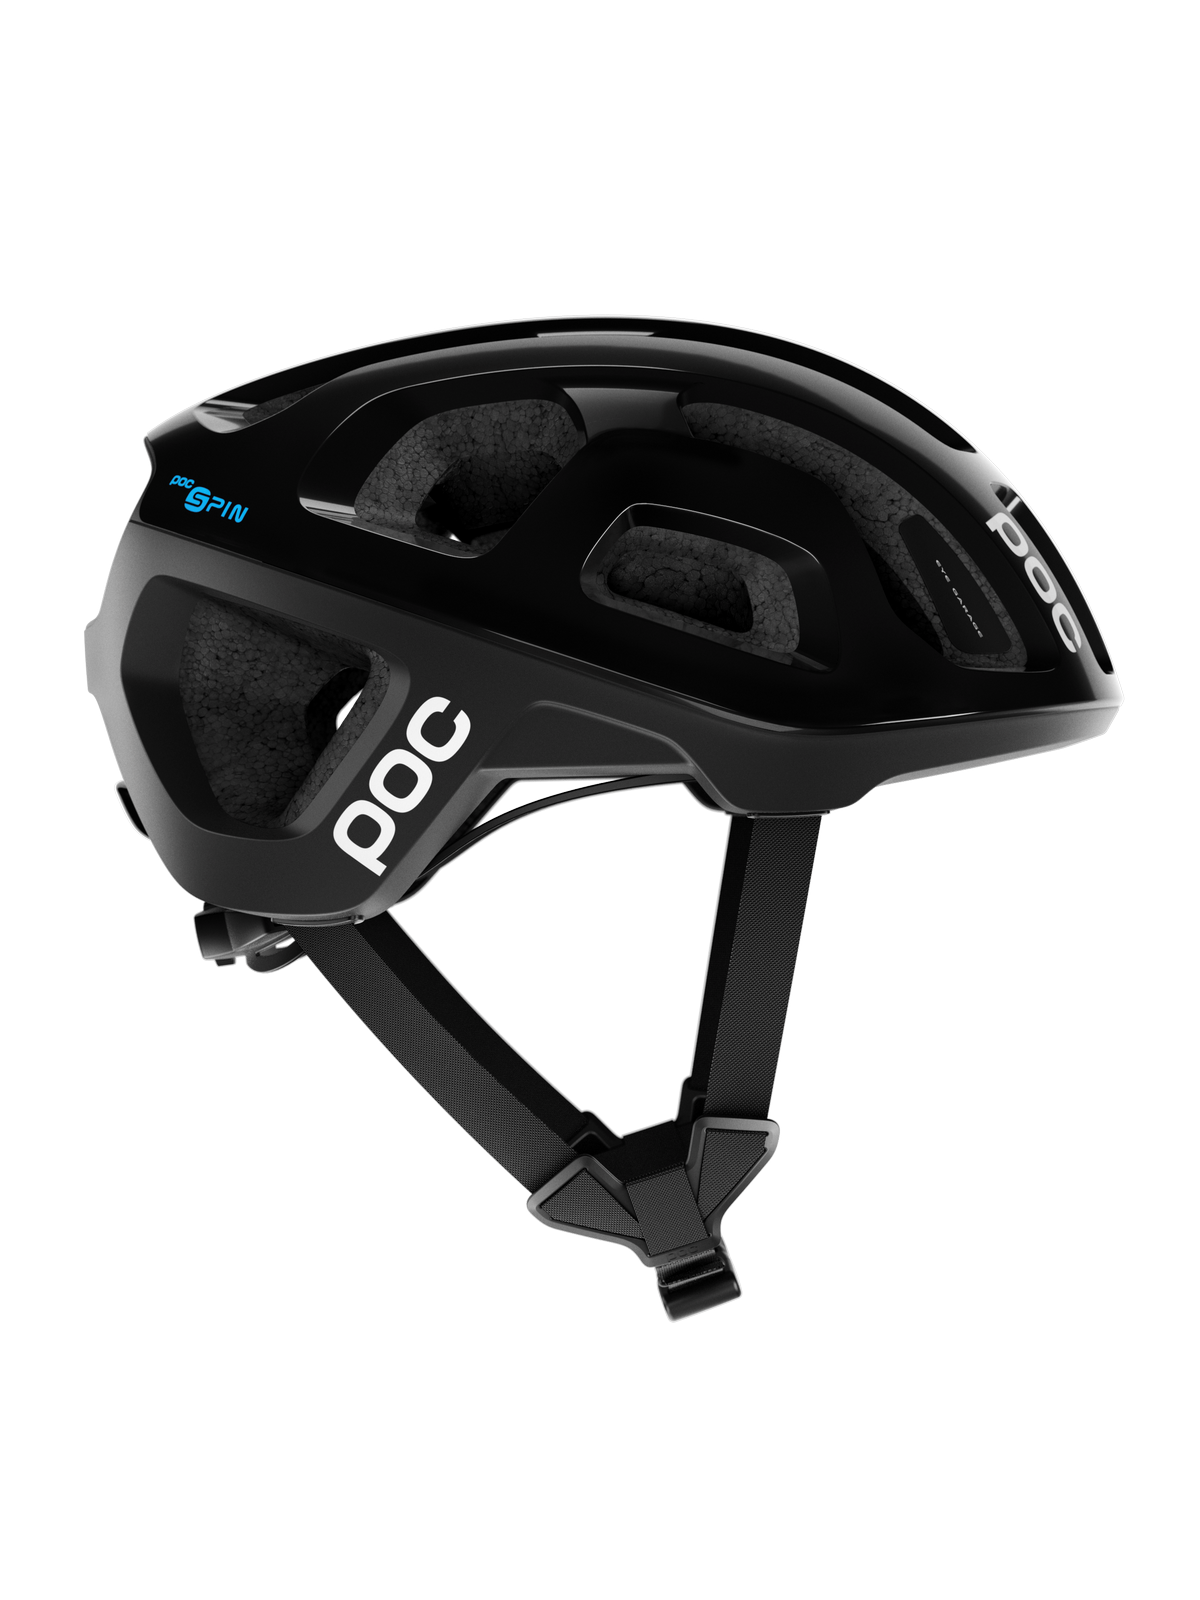 Kask Rowerowy POC OCTAL X SPIN